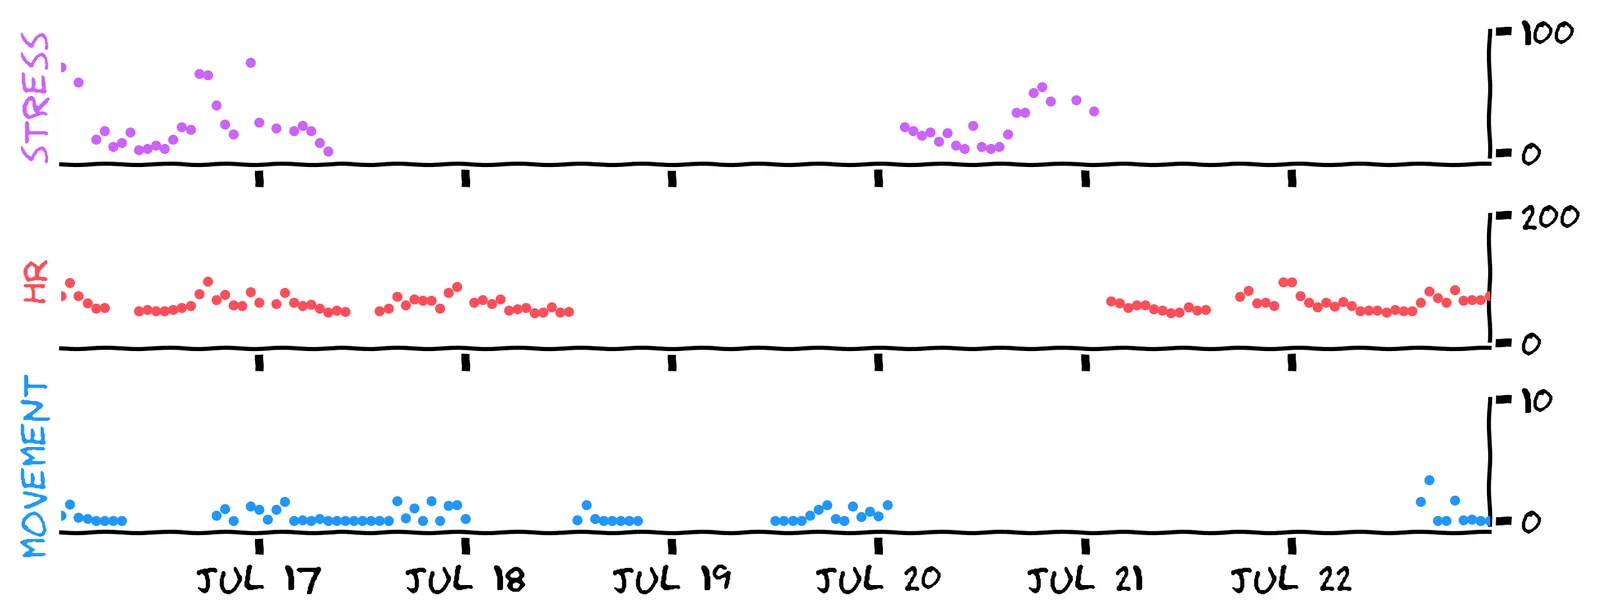 Three plots. They share the same x-axis which is time, from Jul 16 to Jul 22. The three plots have separate y-axes: the top is stress in purple, the middle is heart rate in red, and the bottom is movement in blue. There are many gaps in each plot.